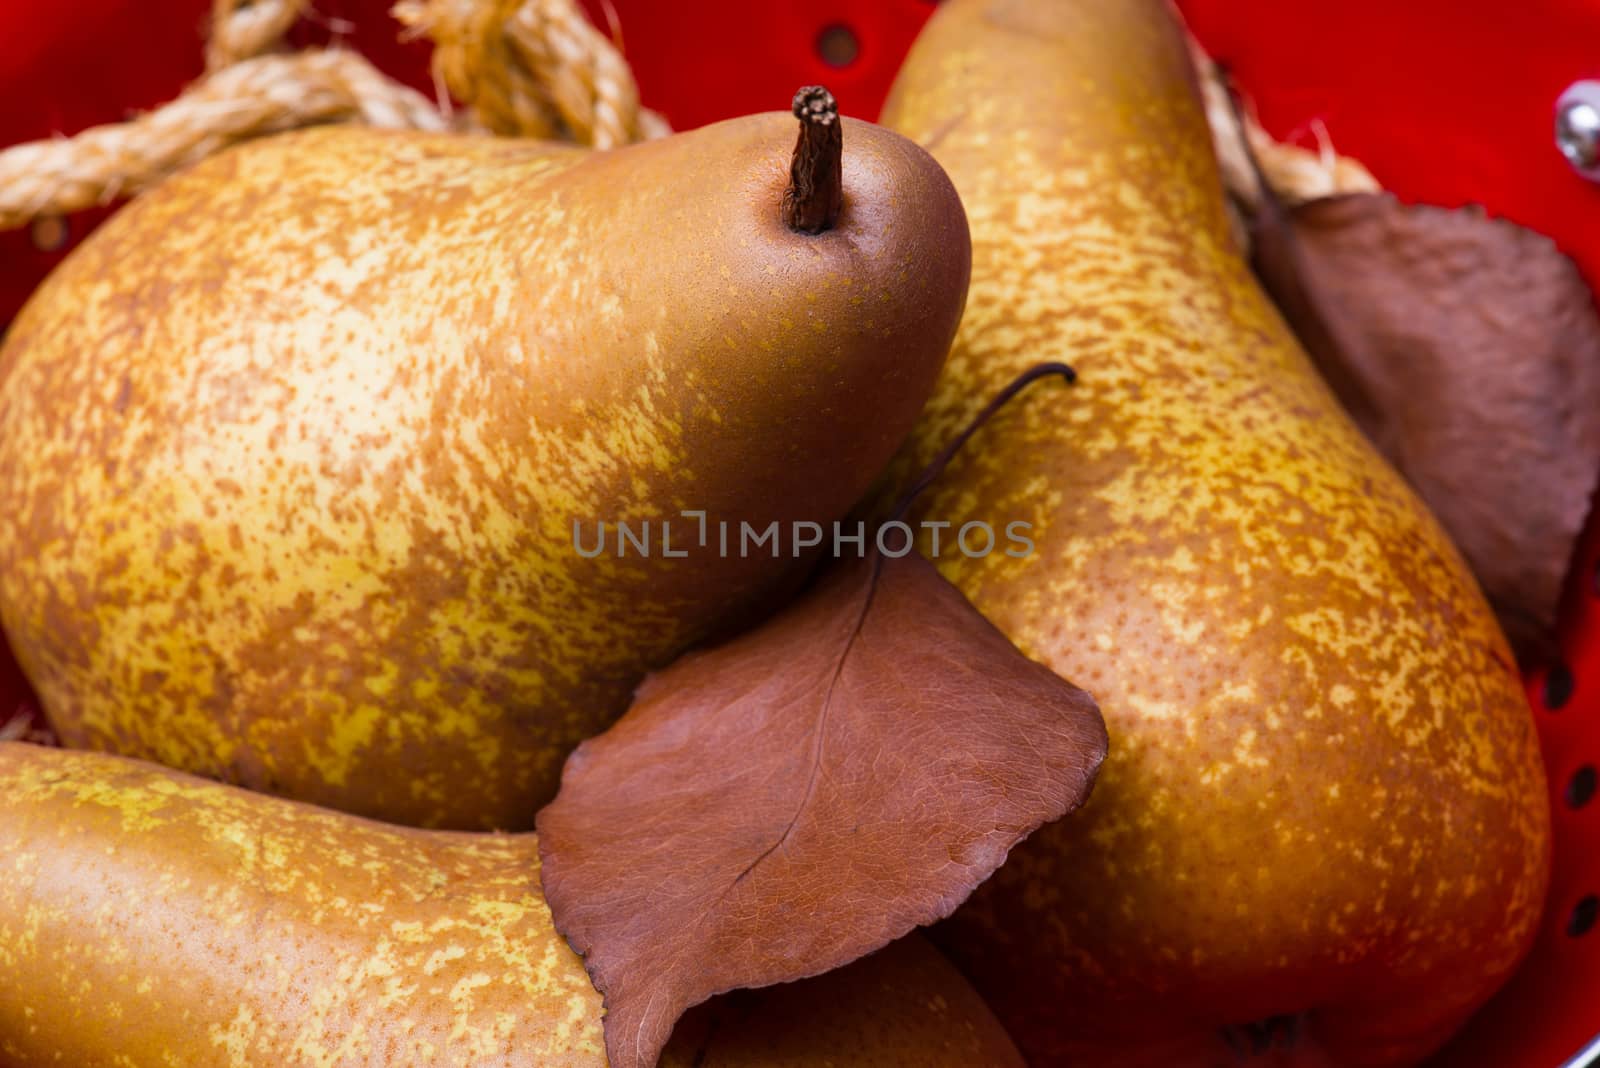 Pears on red colander by cristinphotos